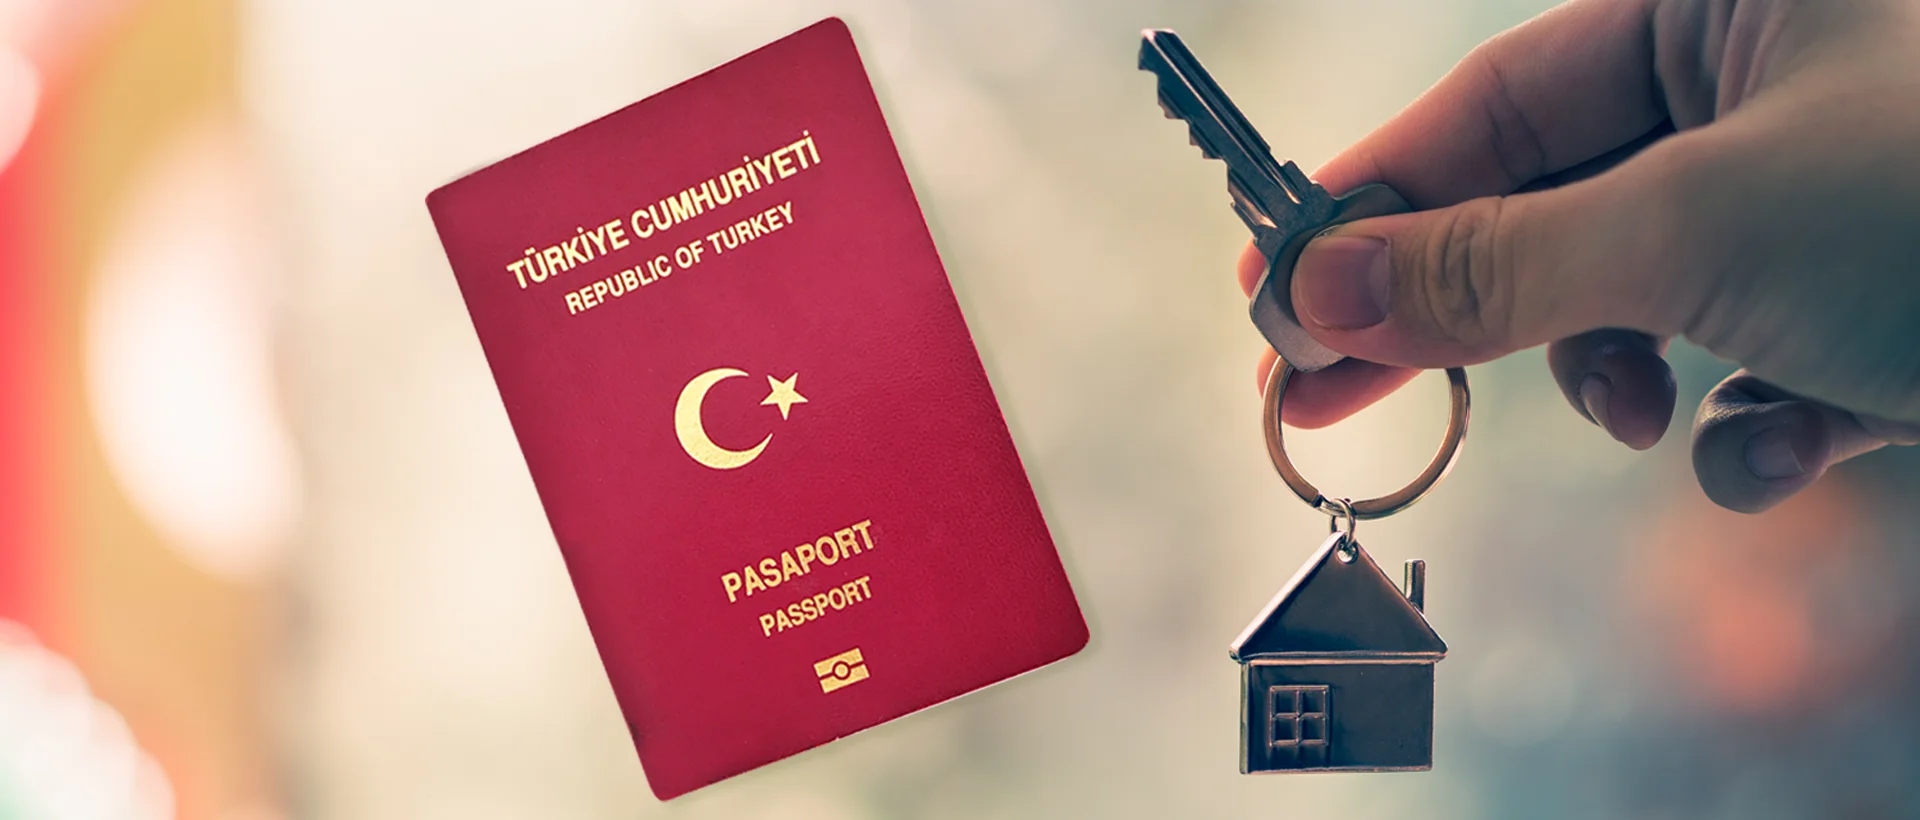 Turkey's Position in the Global Citizenship by Investment Arena